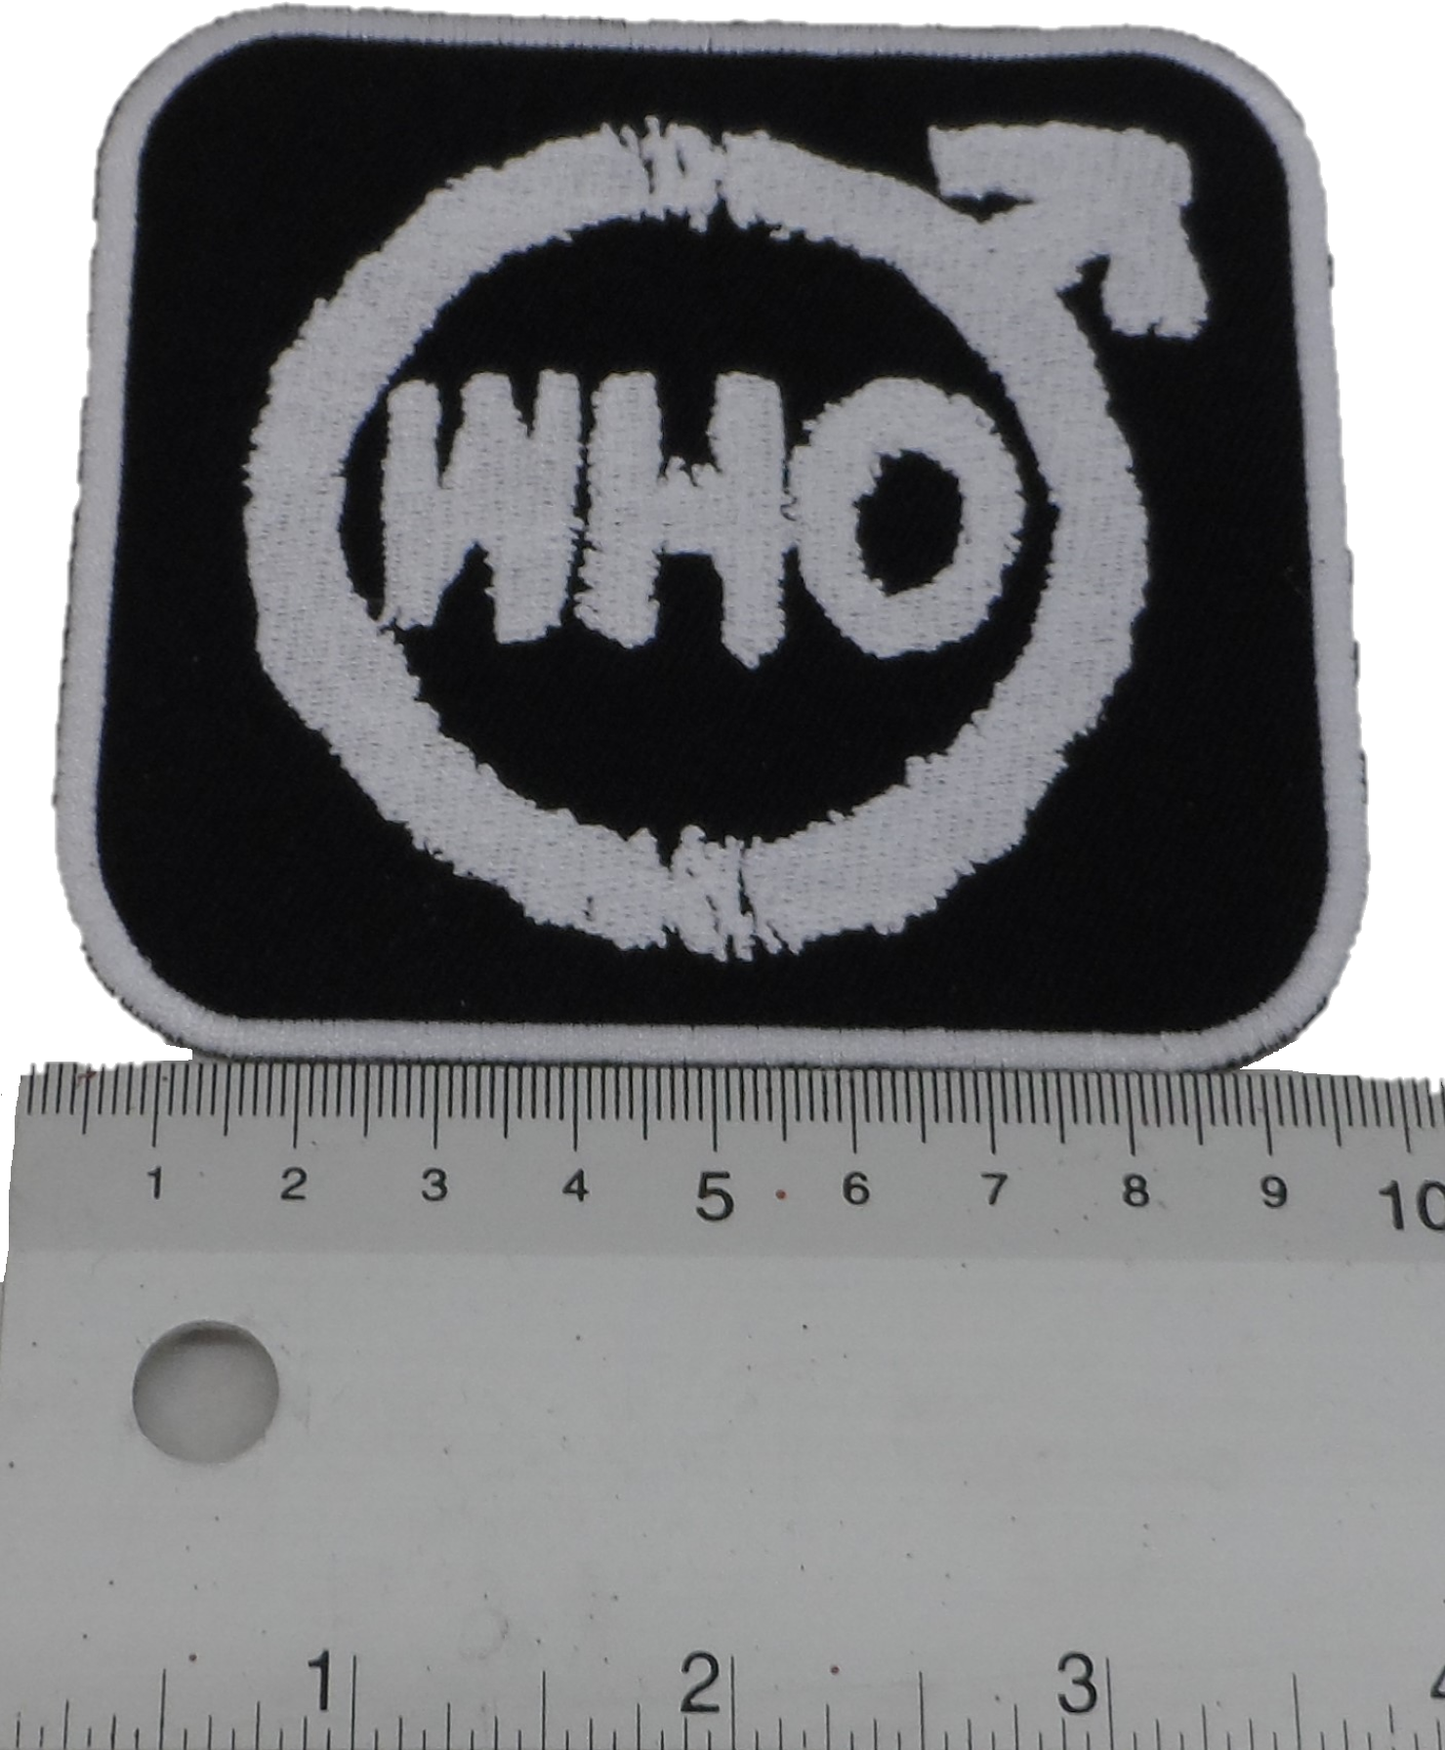 The Who Iron On Arm Patches